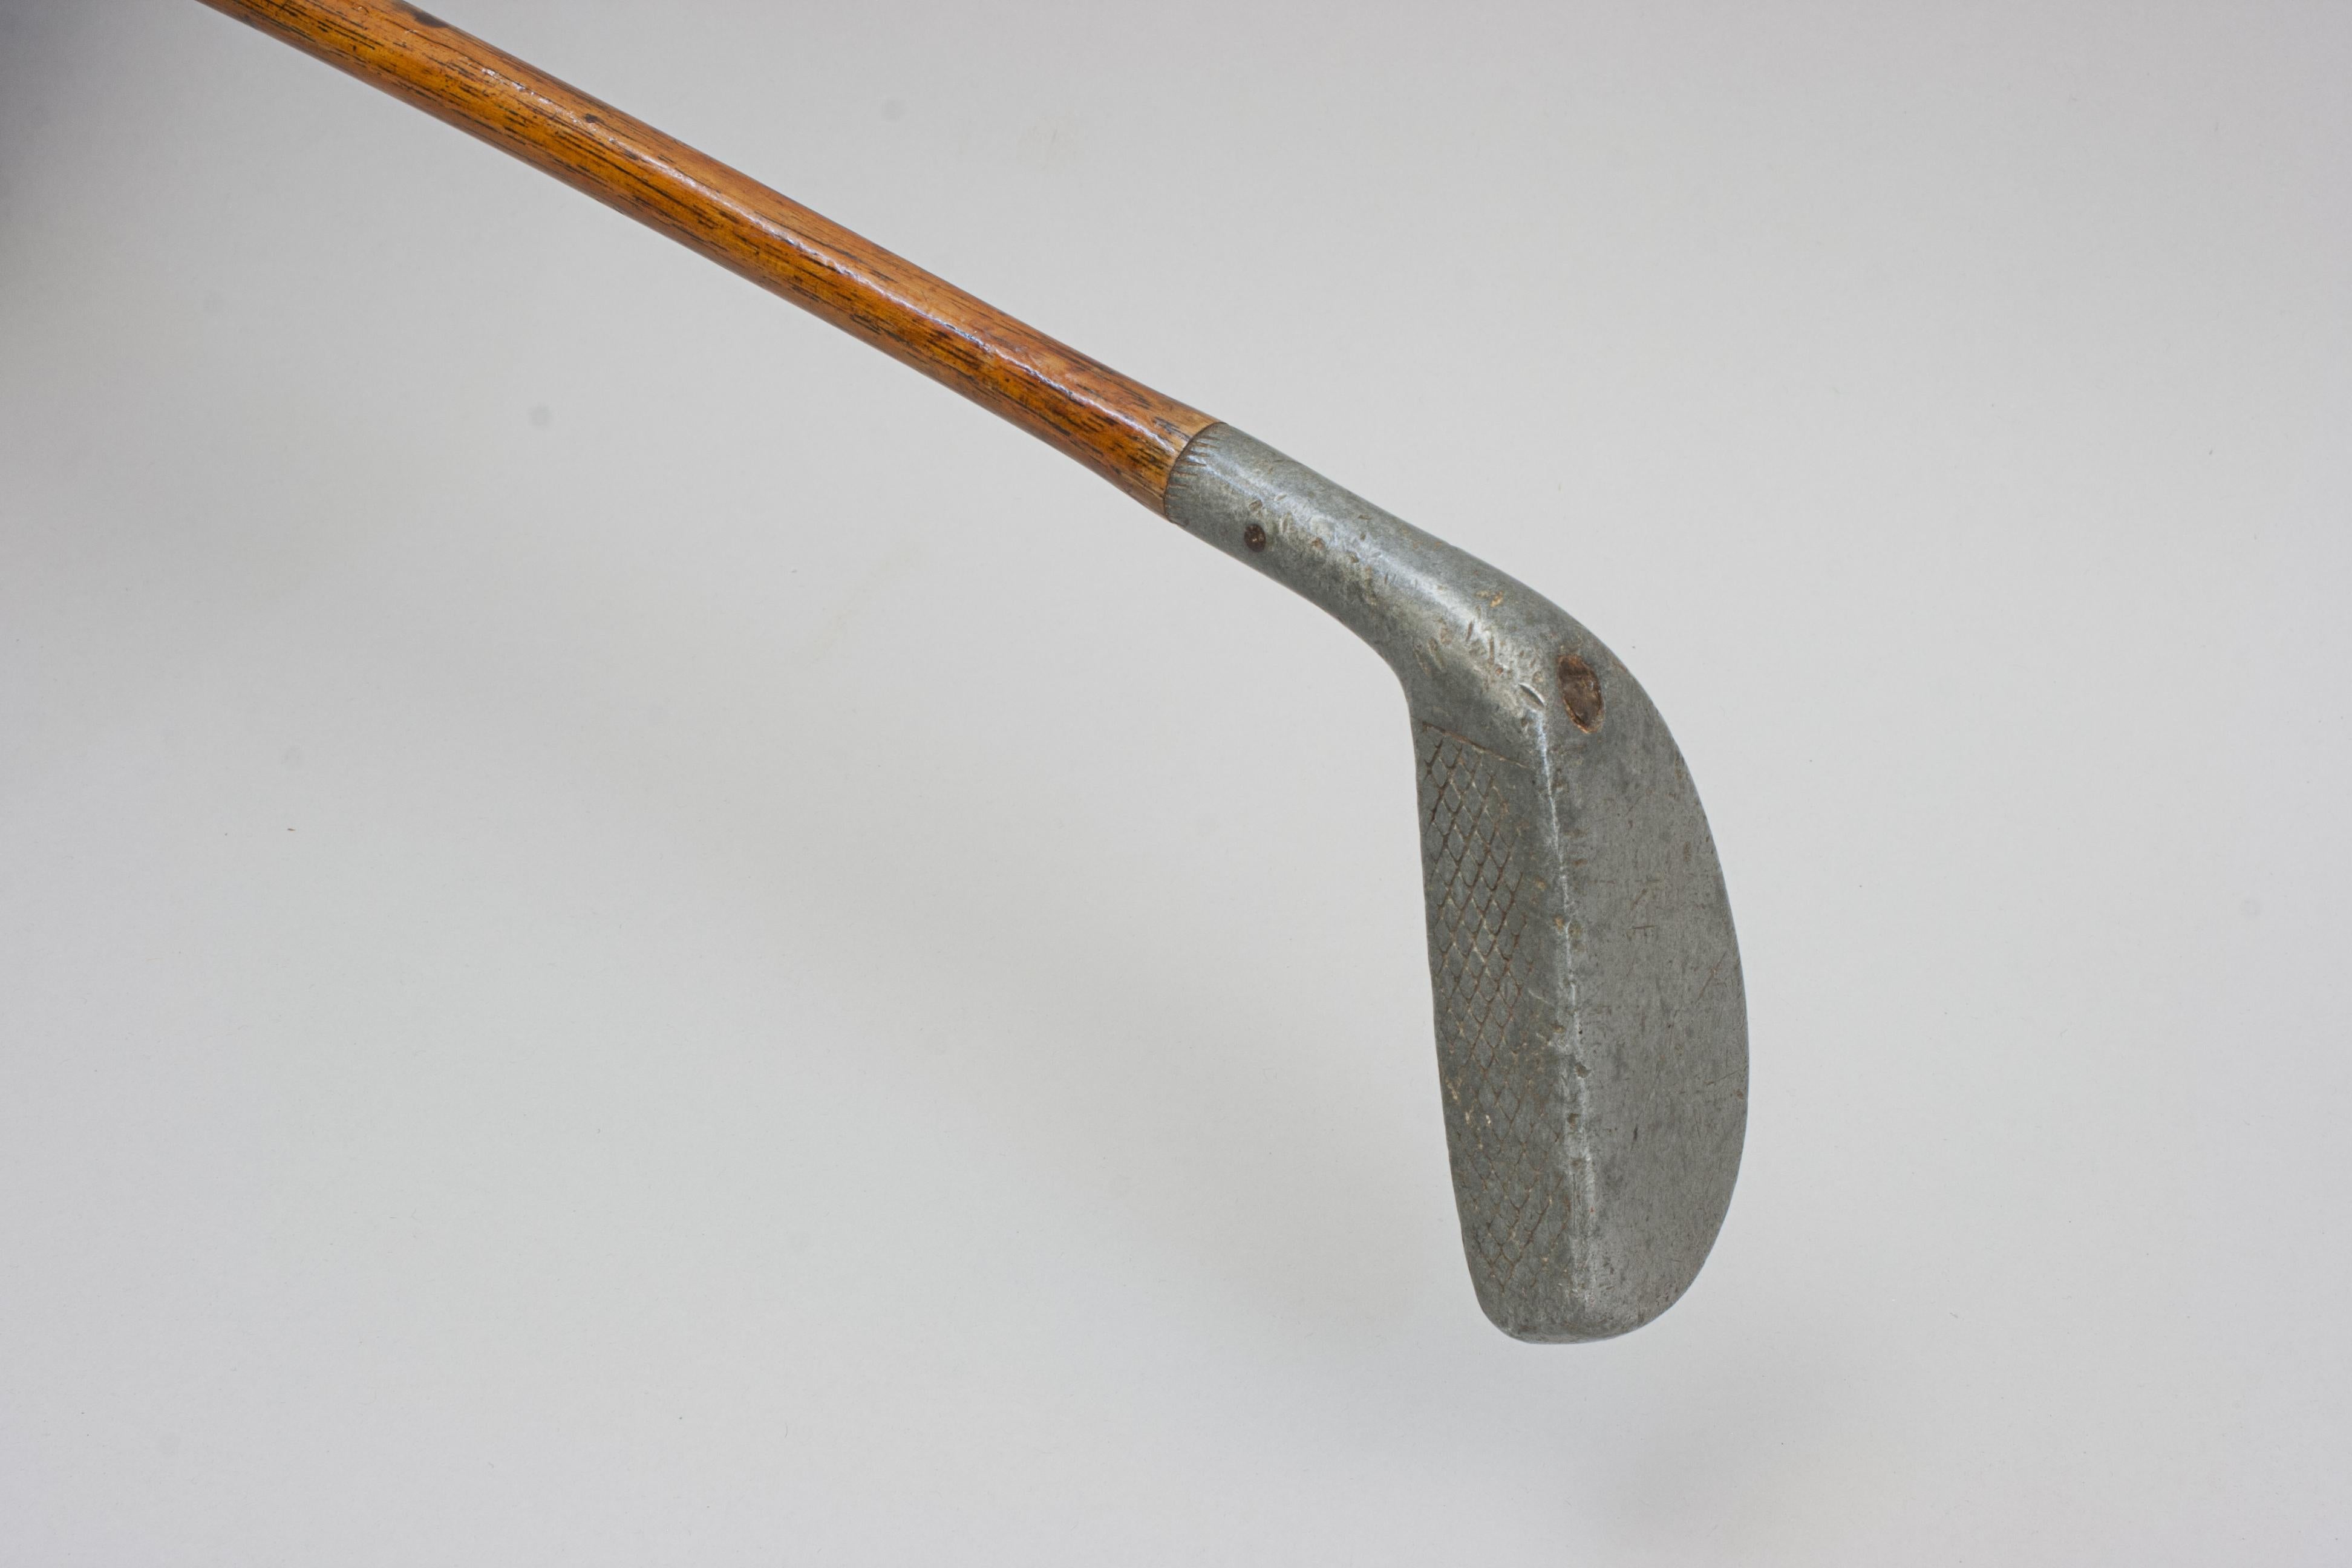 Aluminum Vintage Golf Club, Putter With Alloy Head For Sale